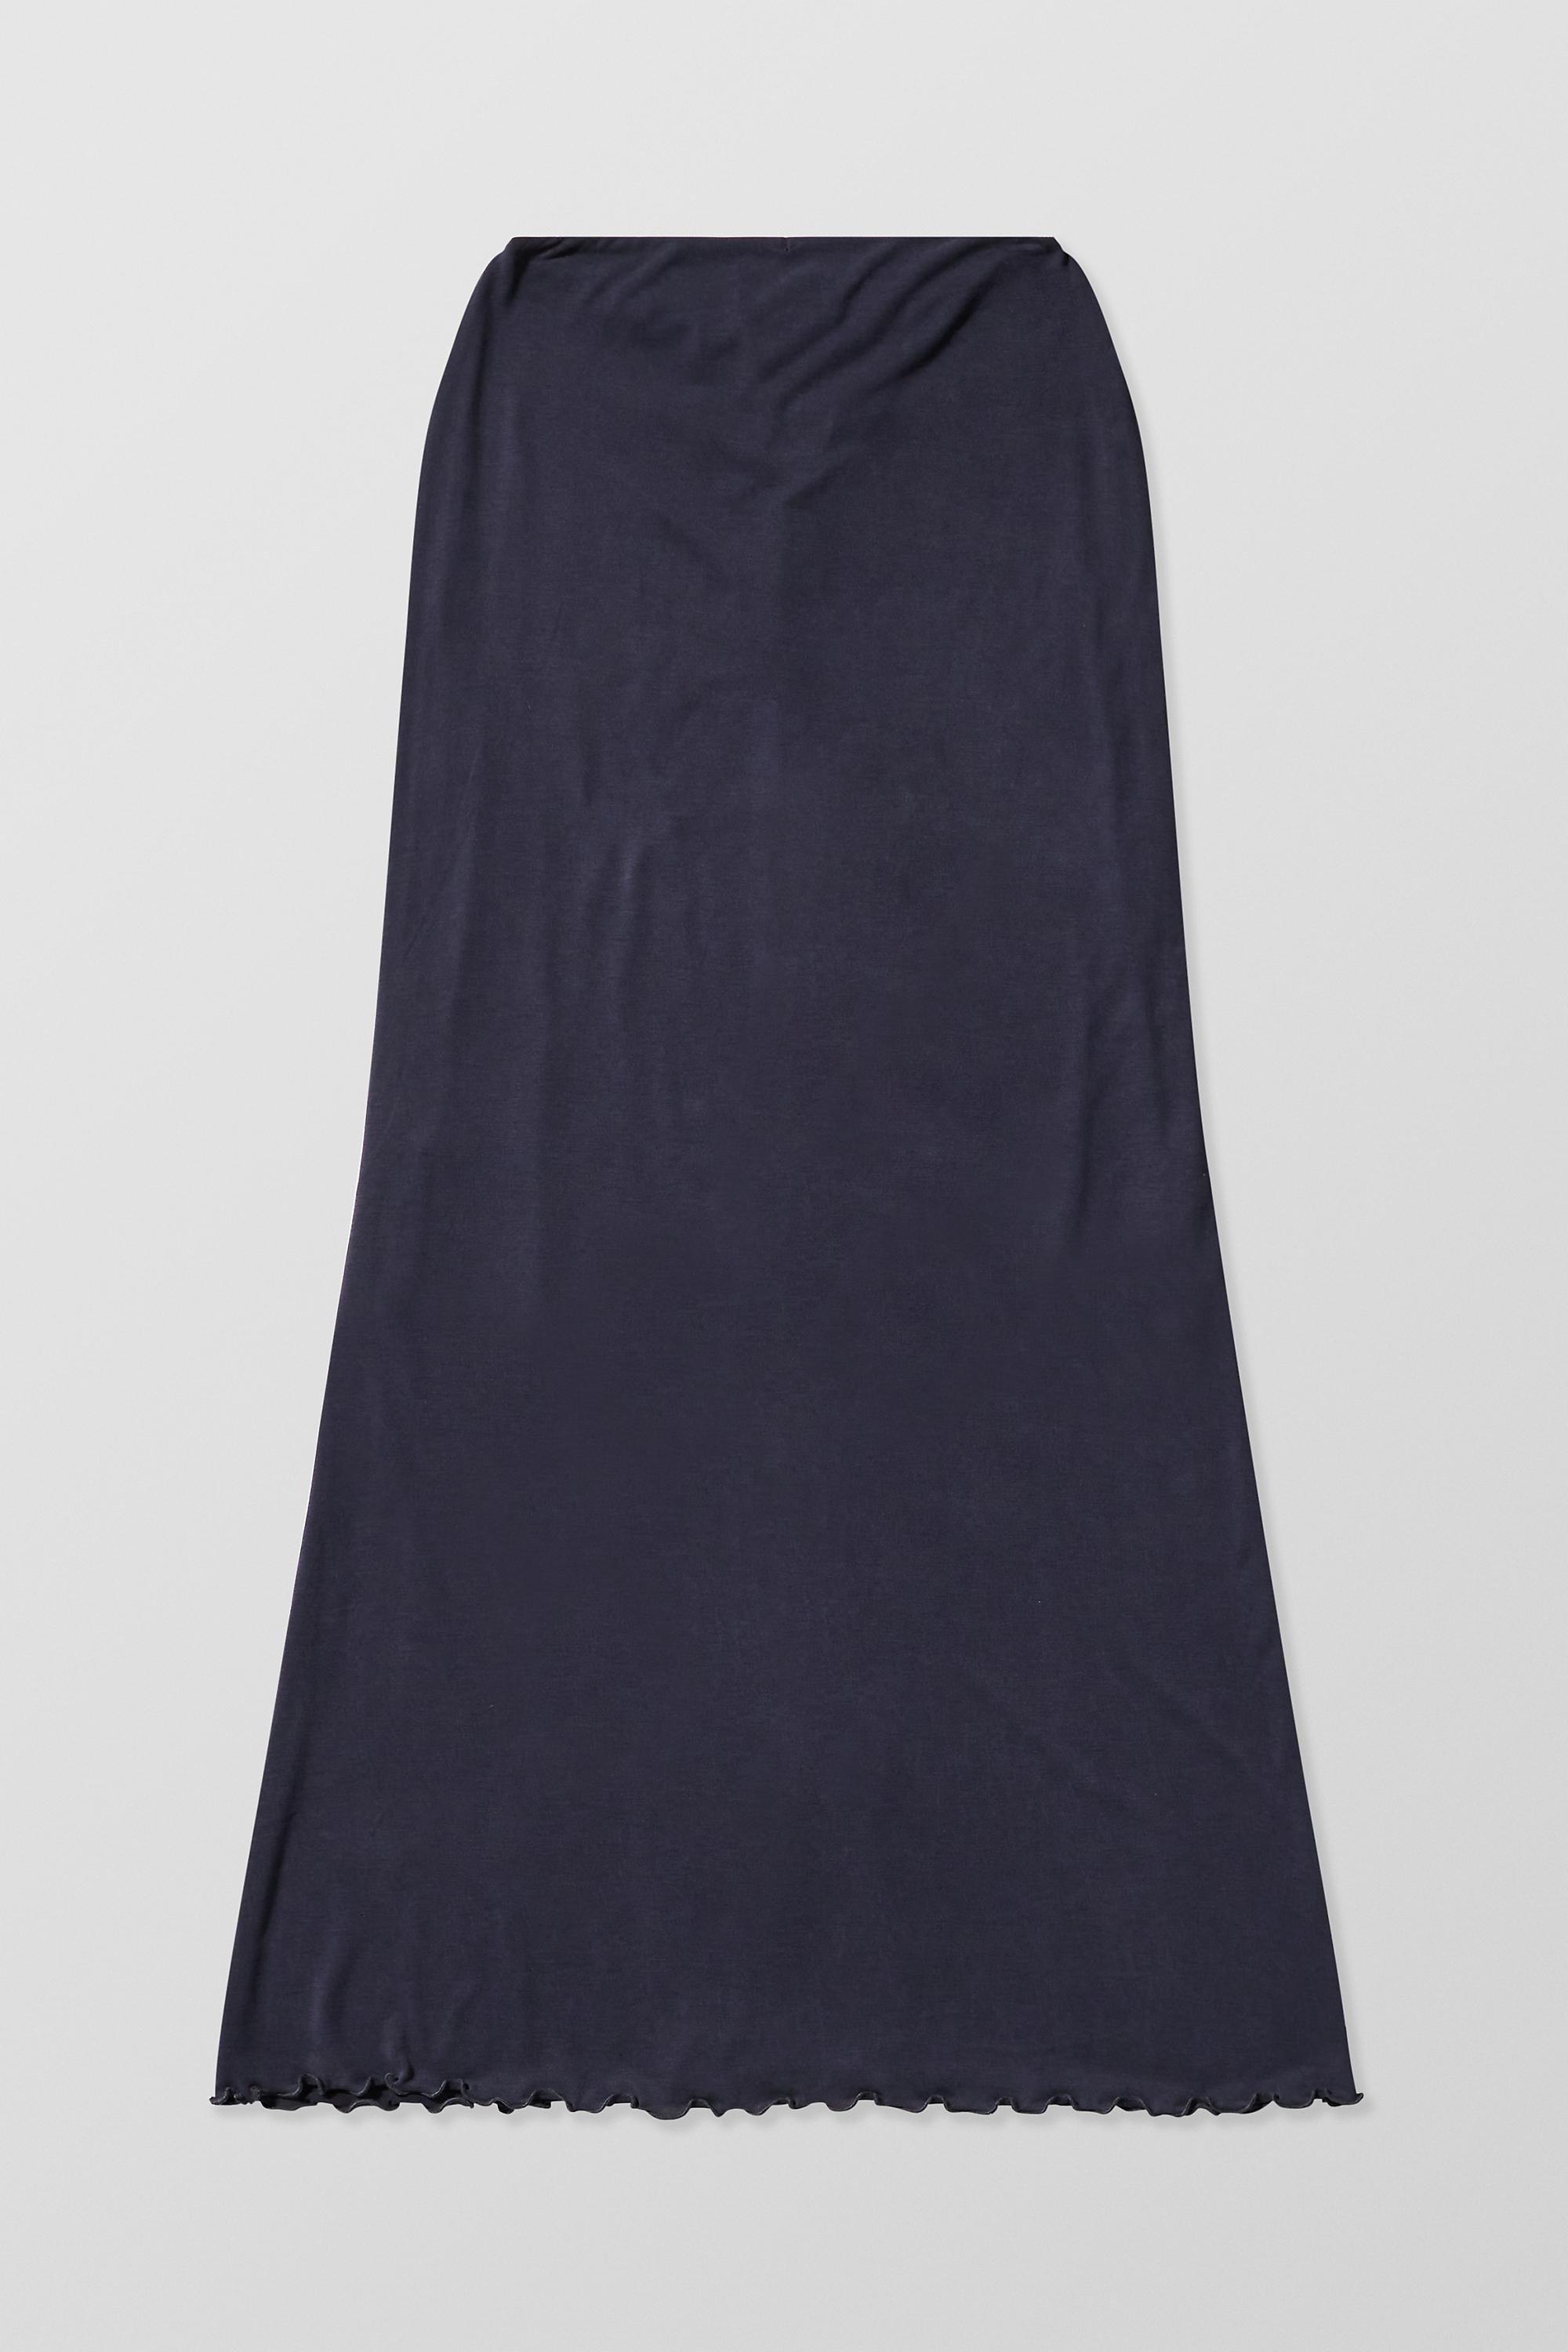 Urban Outfitters - Black Cupro Maxi Skirt